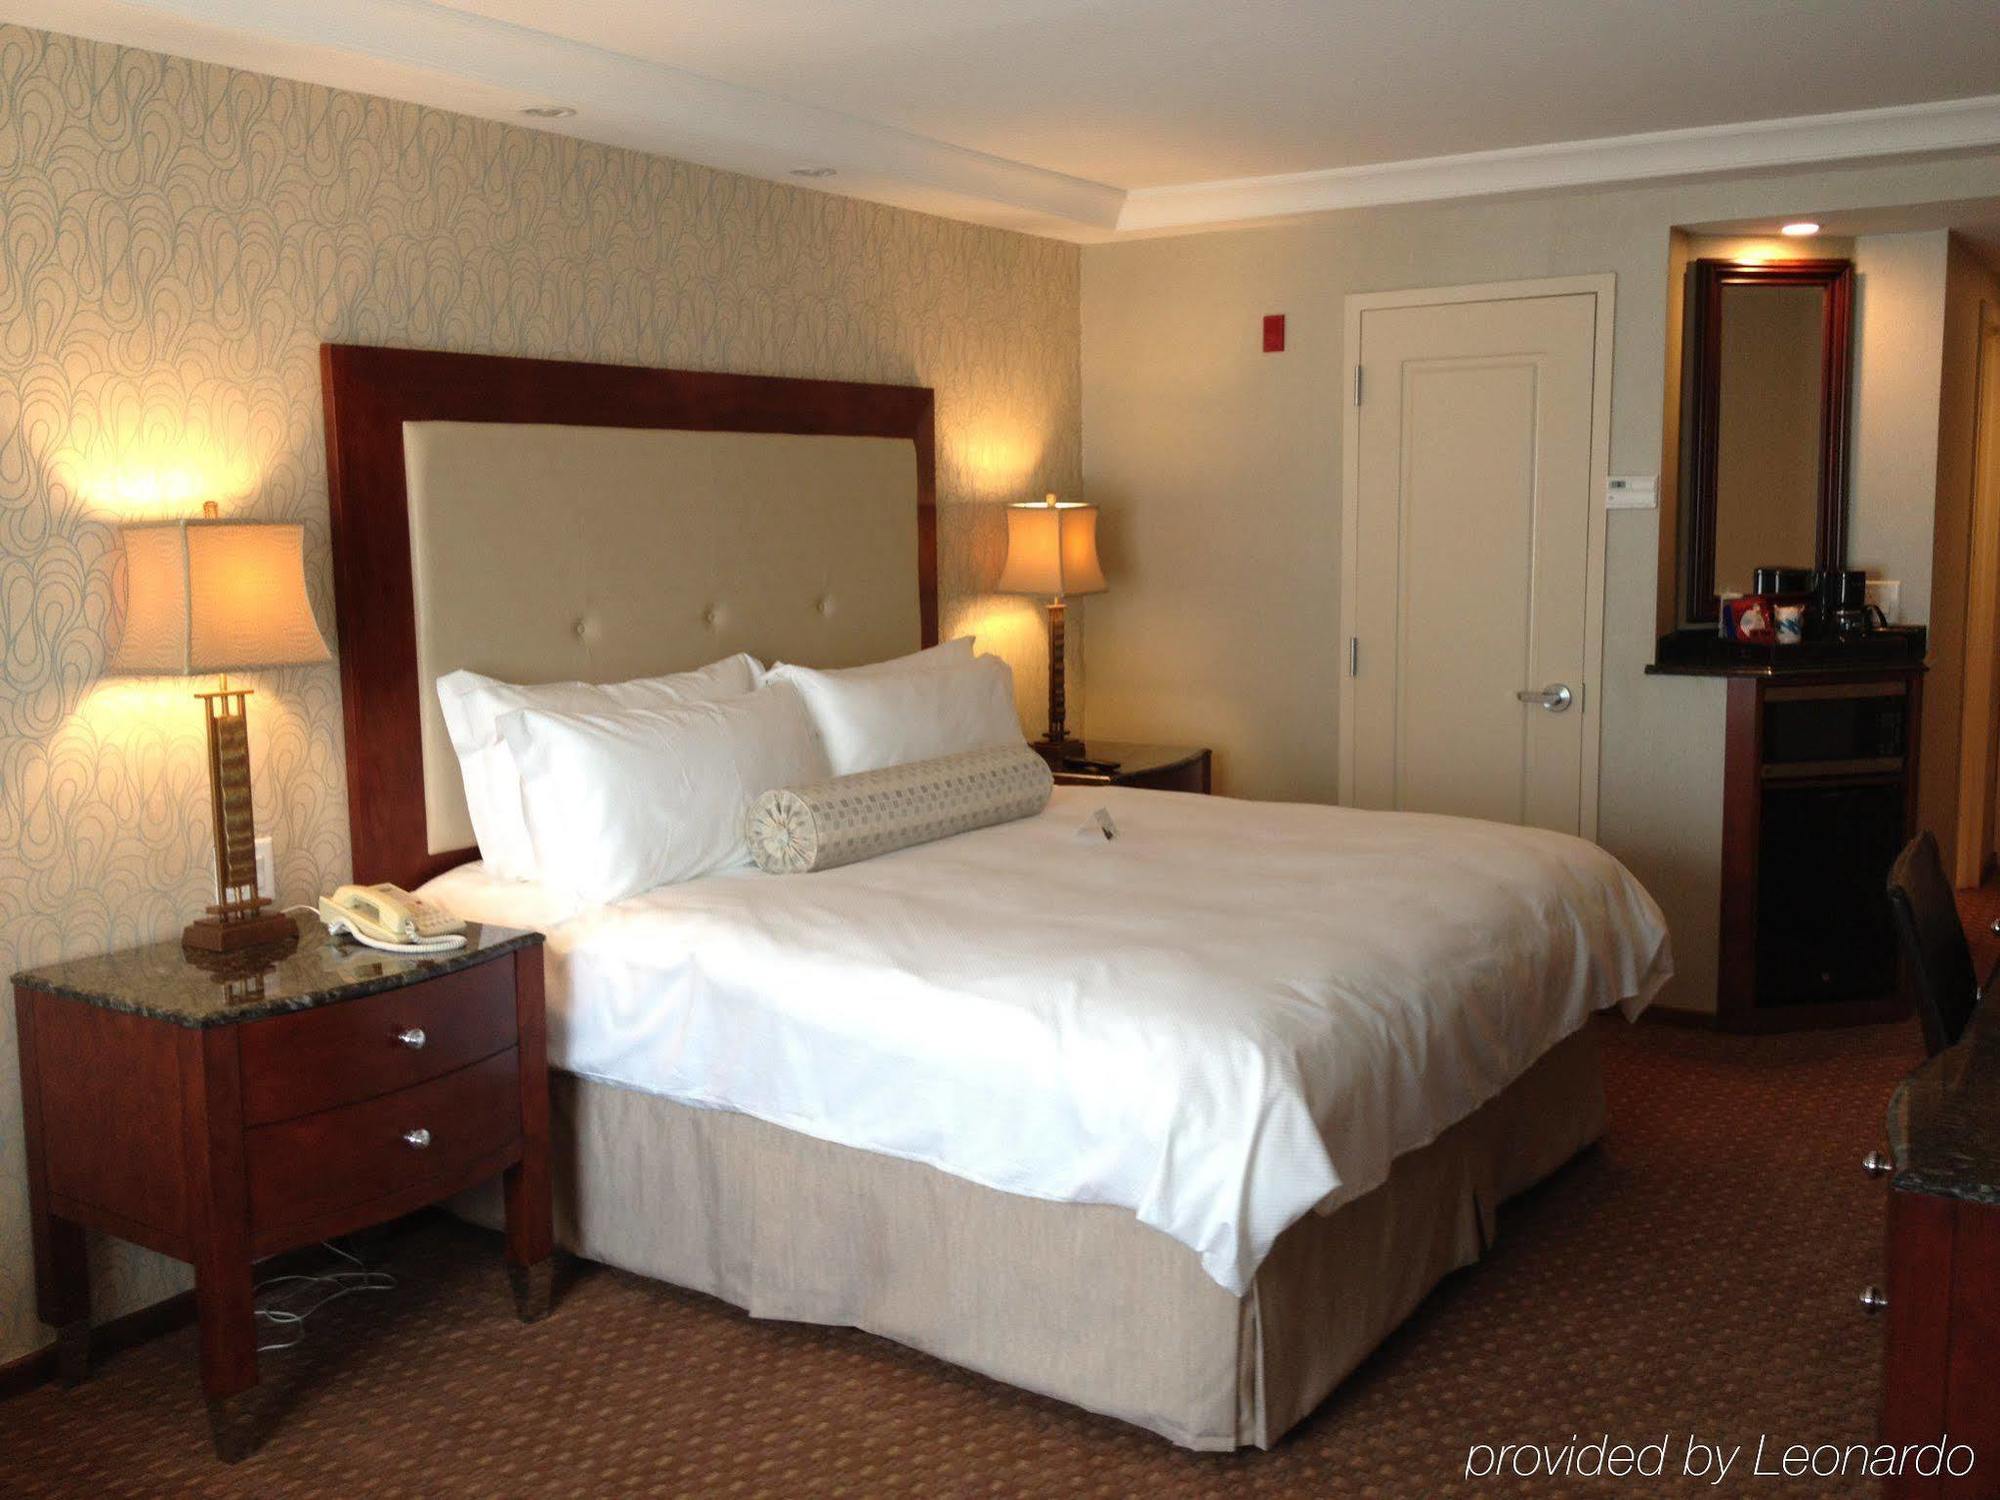 Town & Country Inn And Suites Charleston Kamer foto